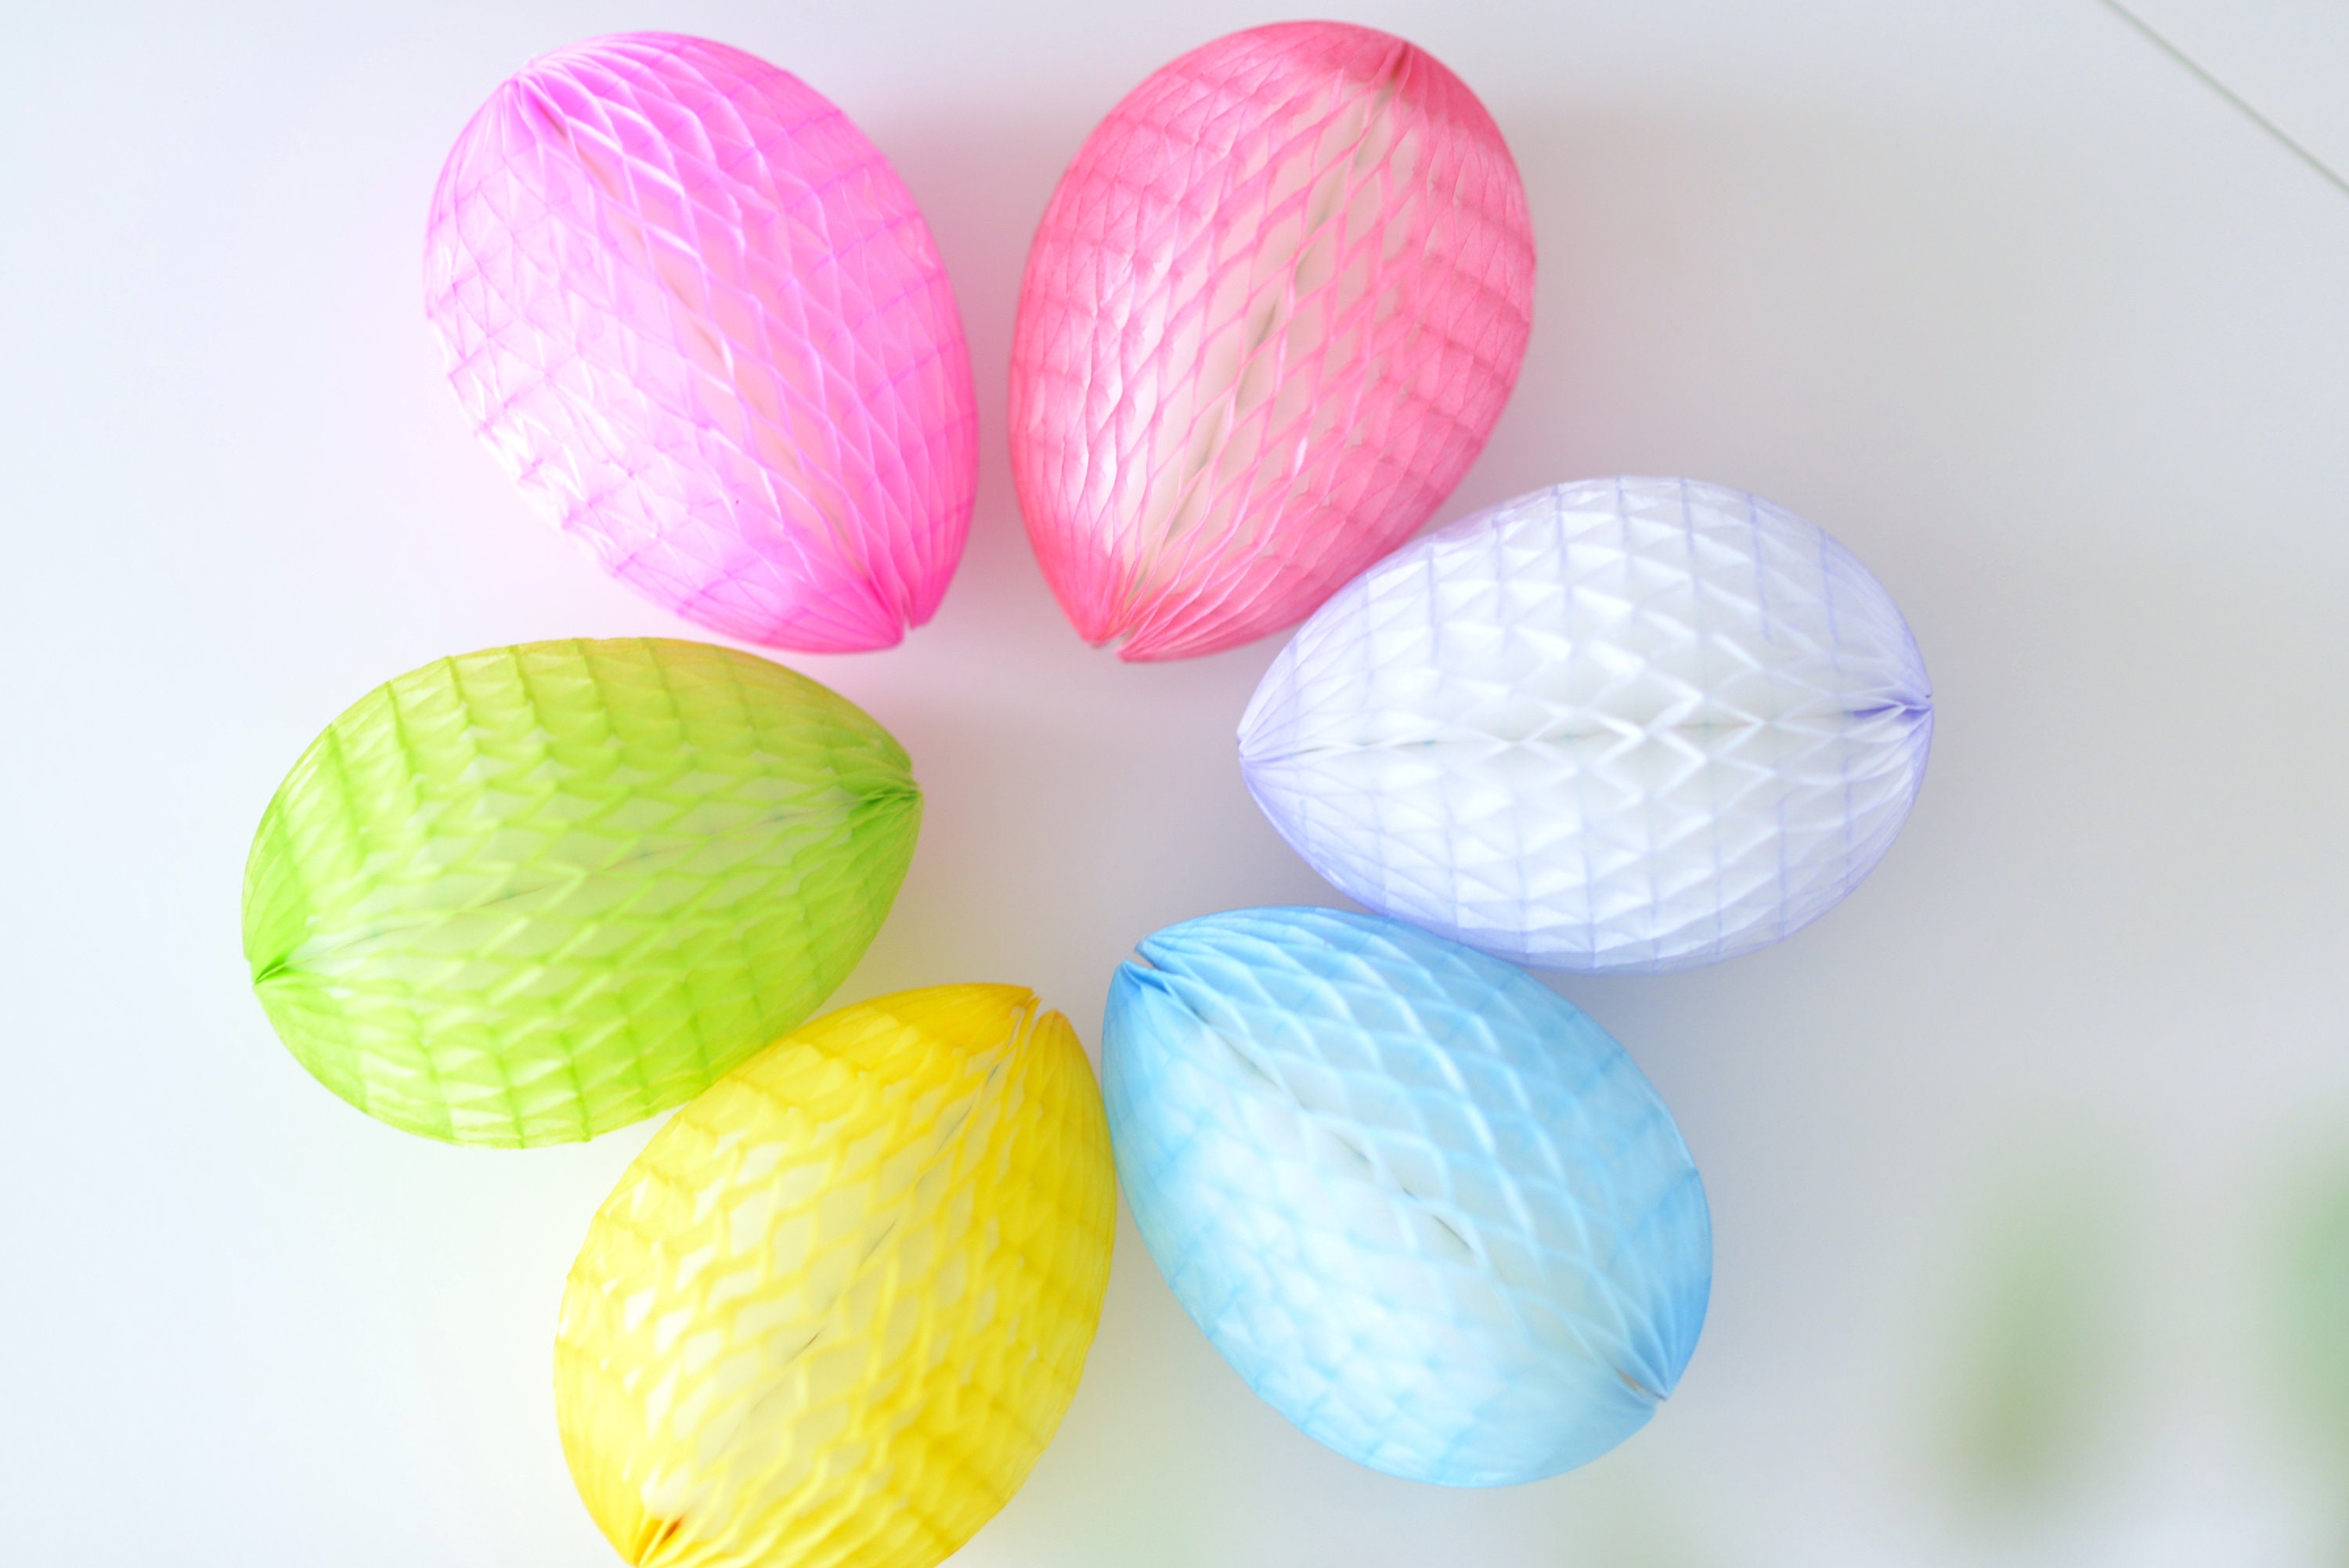 Easter Party Supplies Mini Hanging Egg Designs Home Decor Ornaments Crafts 7pcs 